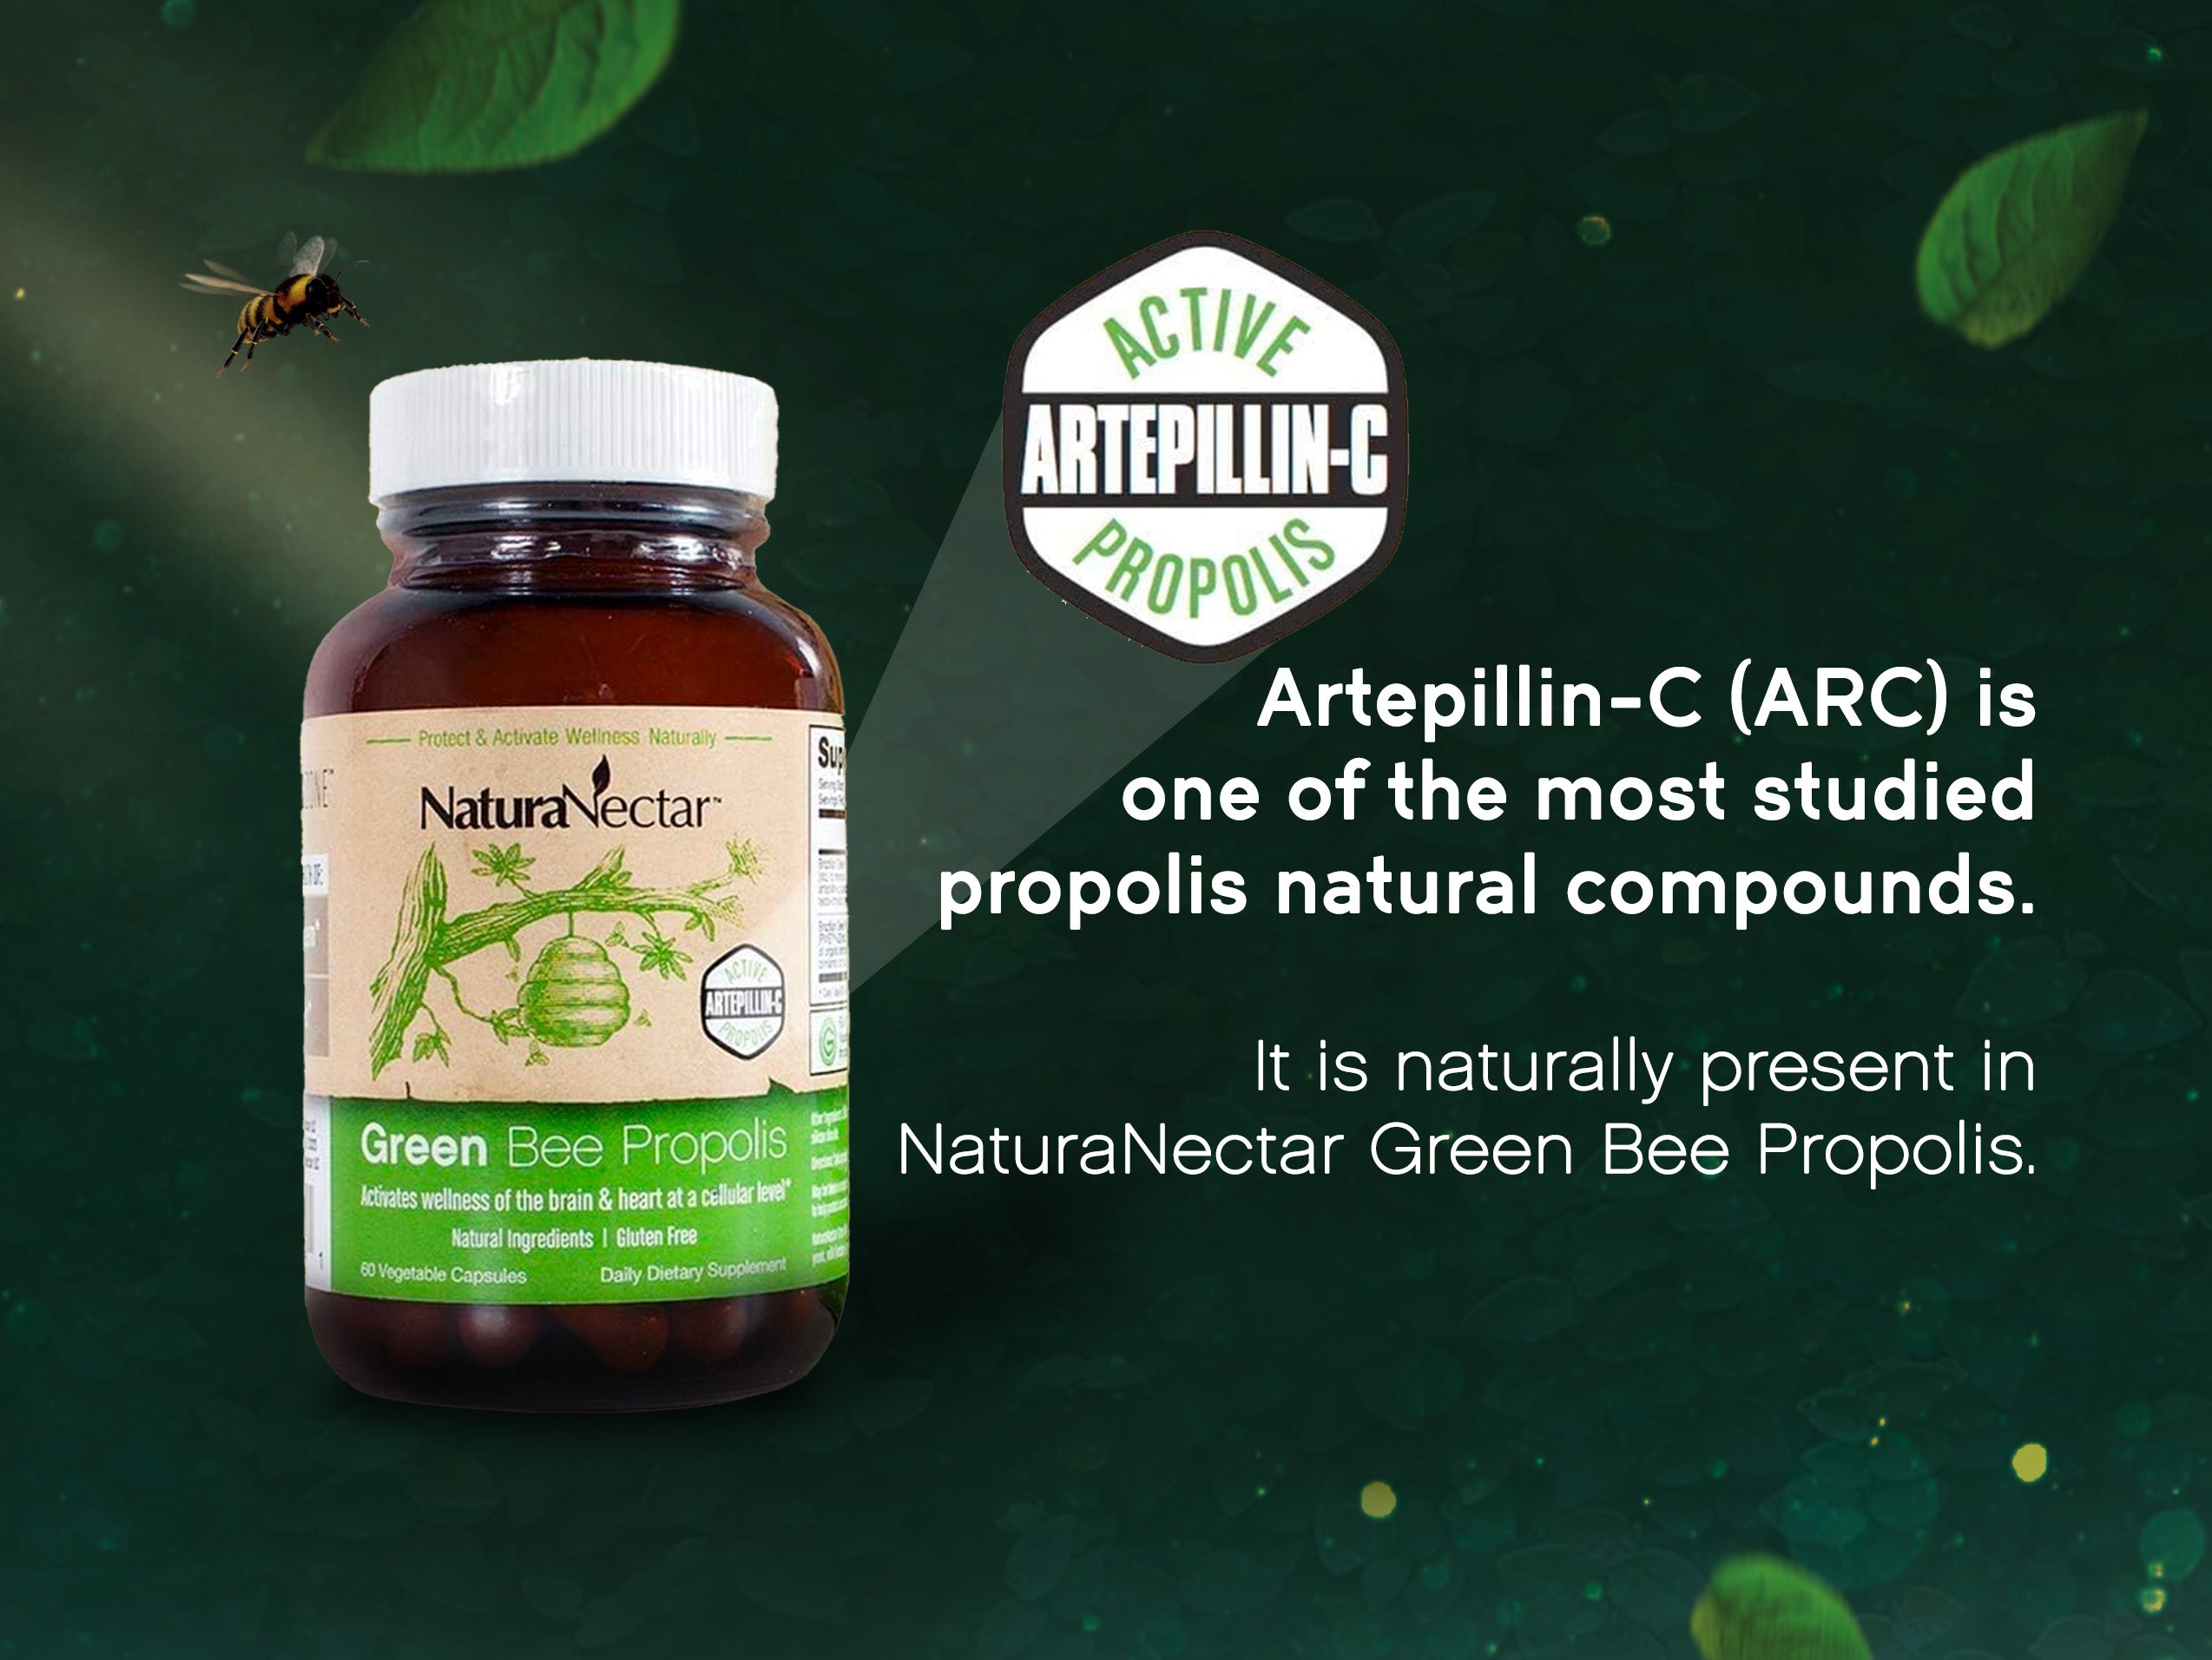 Green Bee Propolis - Nootropic product supports wellness of your brain* & immune system health* through health-promoting polyphenols like Artepillin-C